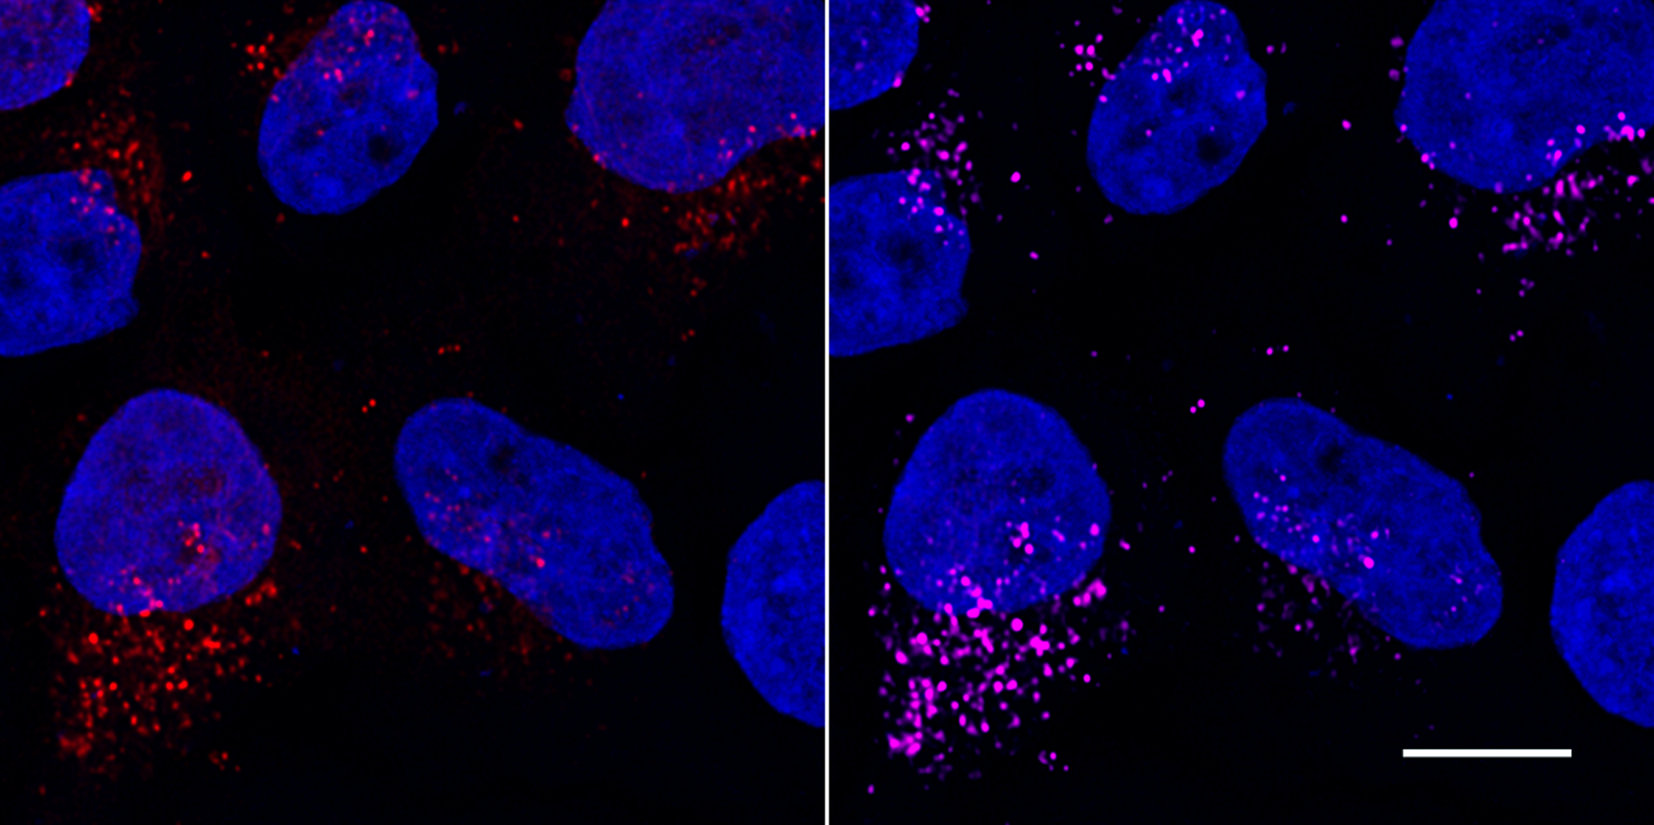 Confocal images of HeLa cells transiently transfected with LC3B-mCherry (red) and immunostained with RFP-Booster Alexa Fluor647 (magenta). Nuclei were stained with DAPI (blue). Scale bar, 10 µm. Images were recorded at the Core Facility Bioimaging at the Biomedical Center, LMU Munich.